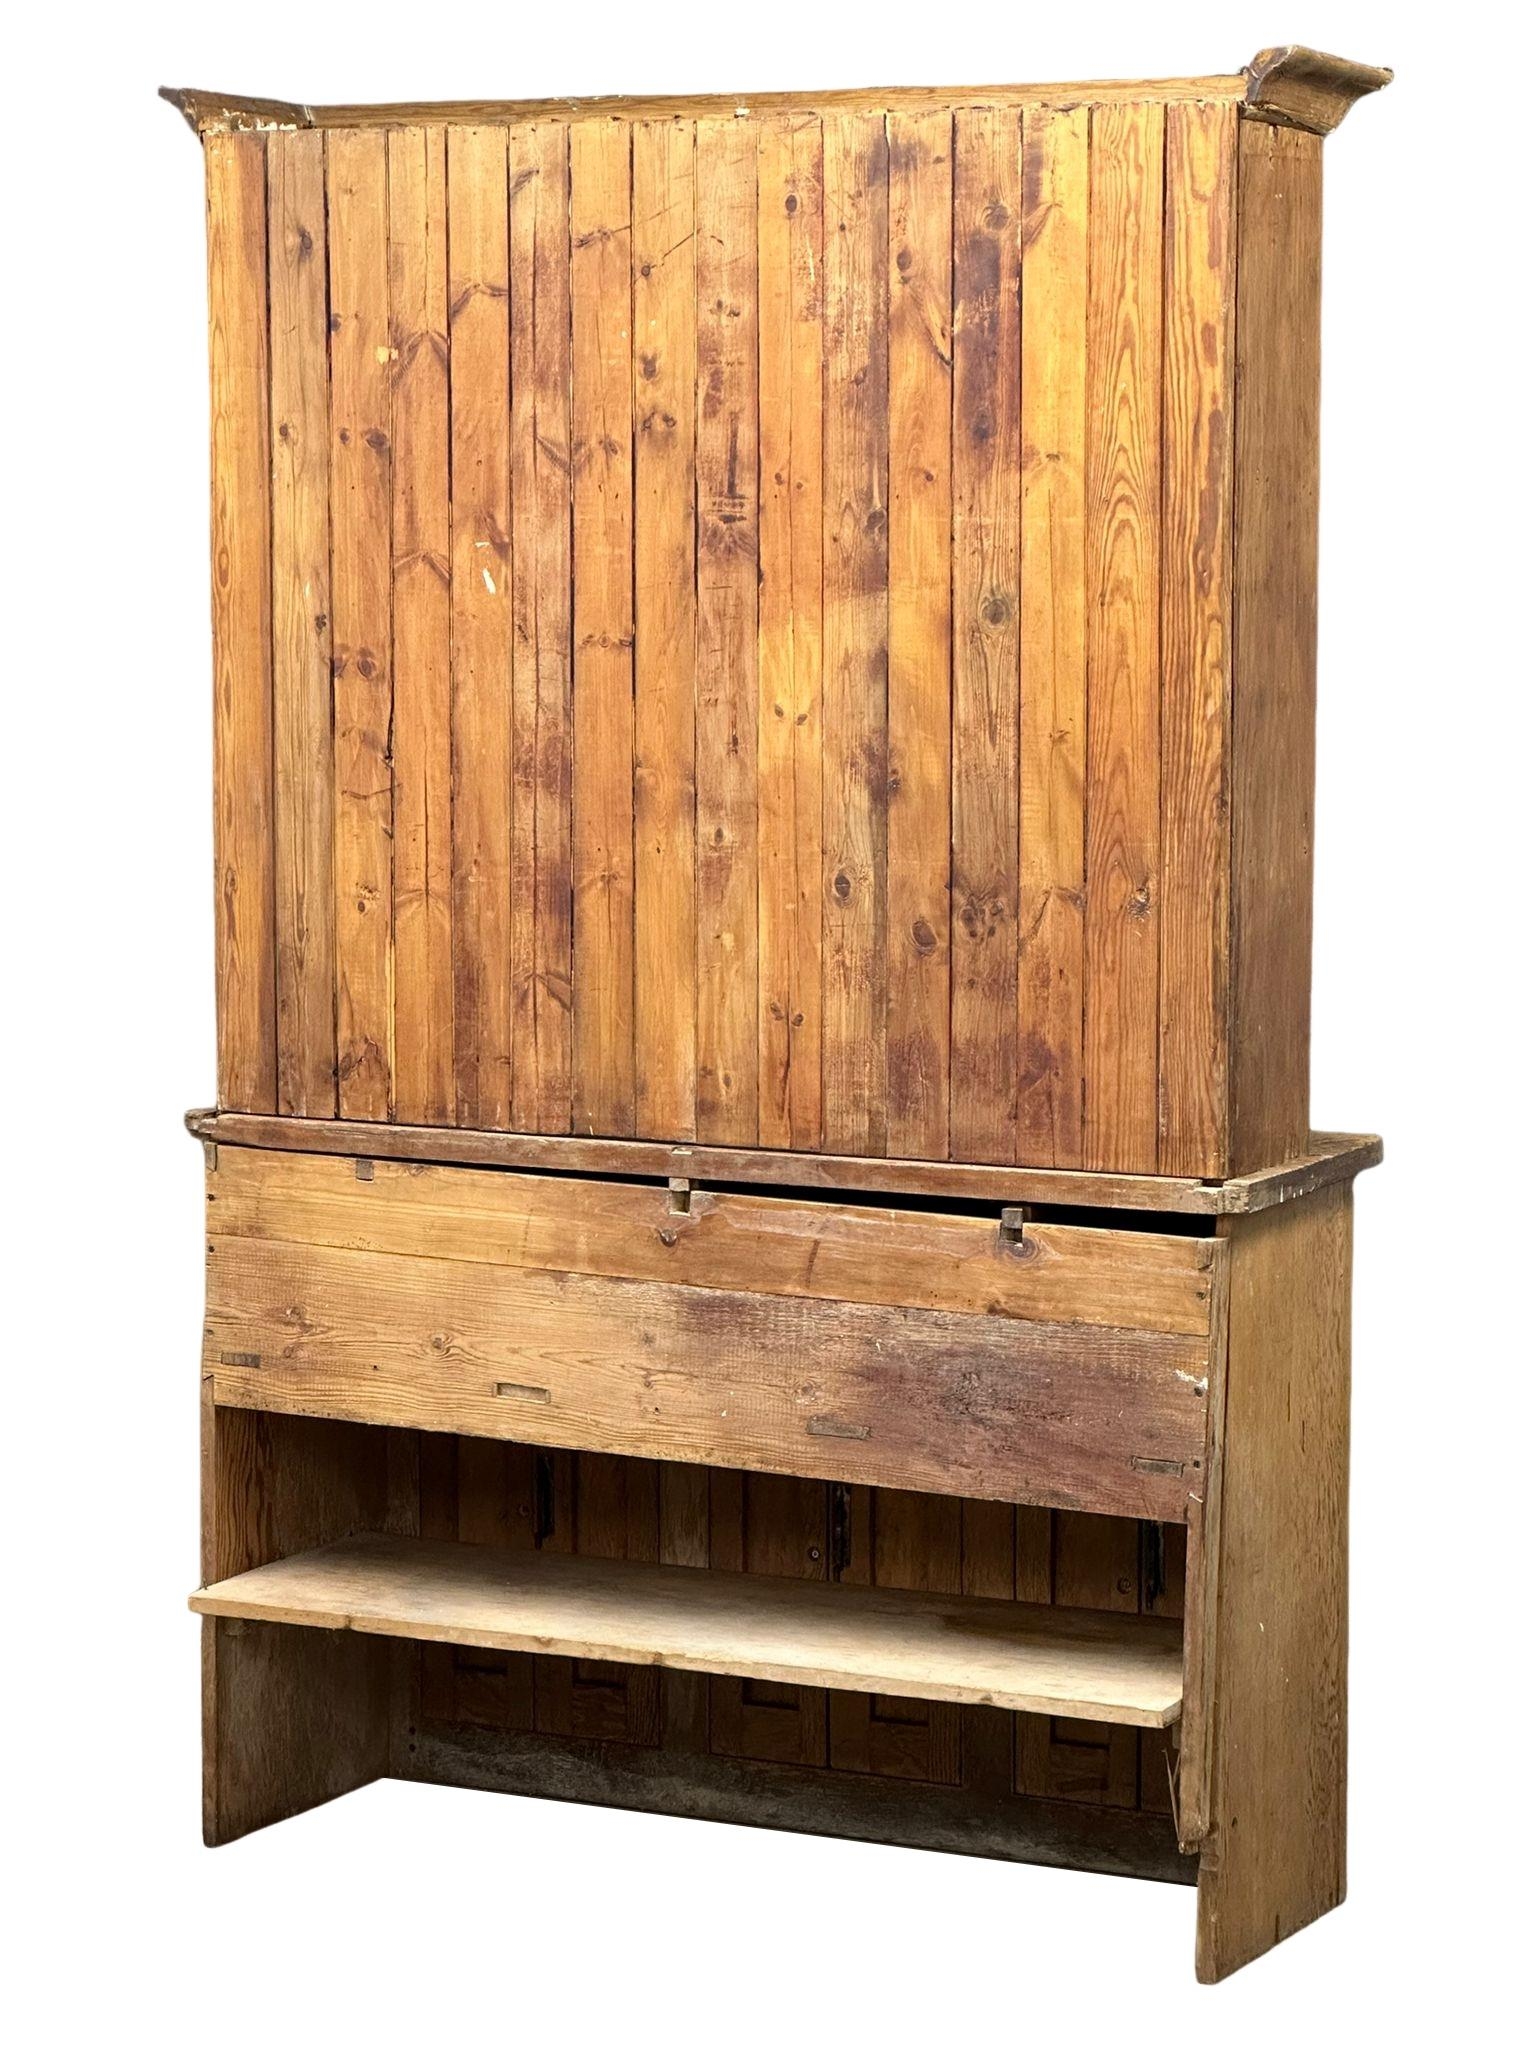 A large Late 19th Century Victorian pine kitchen dresser. 144x48x221cm - Image 7 of 8